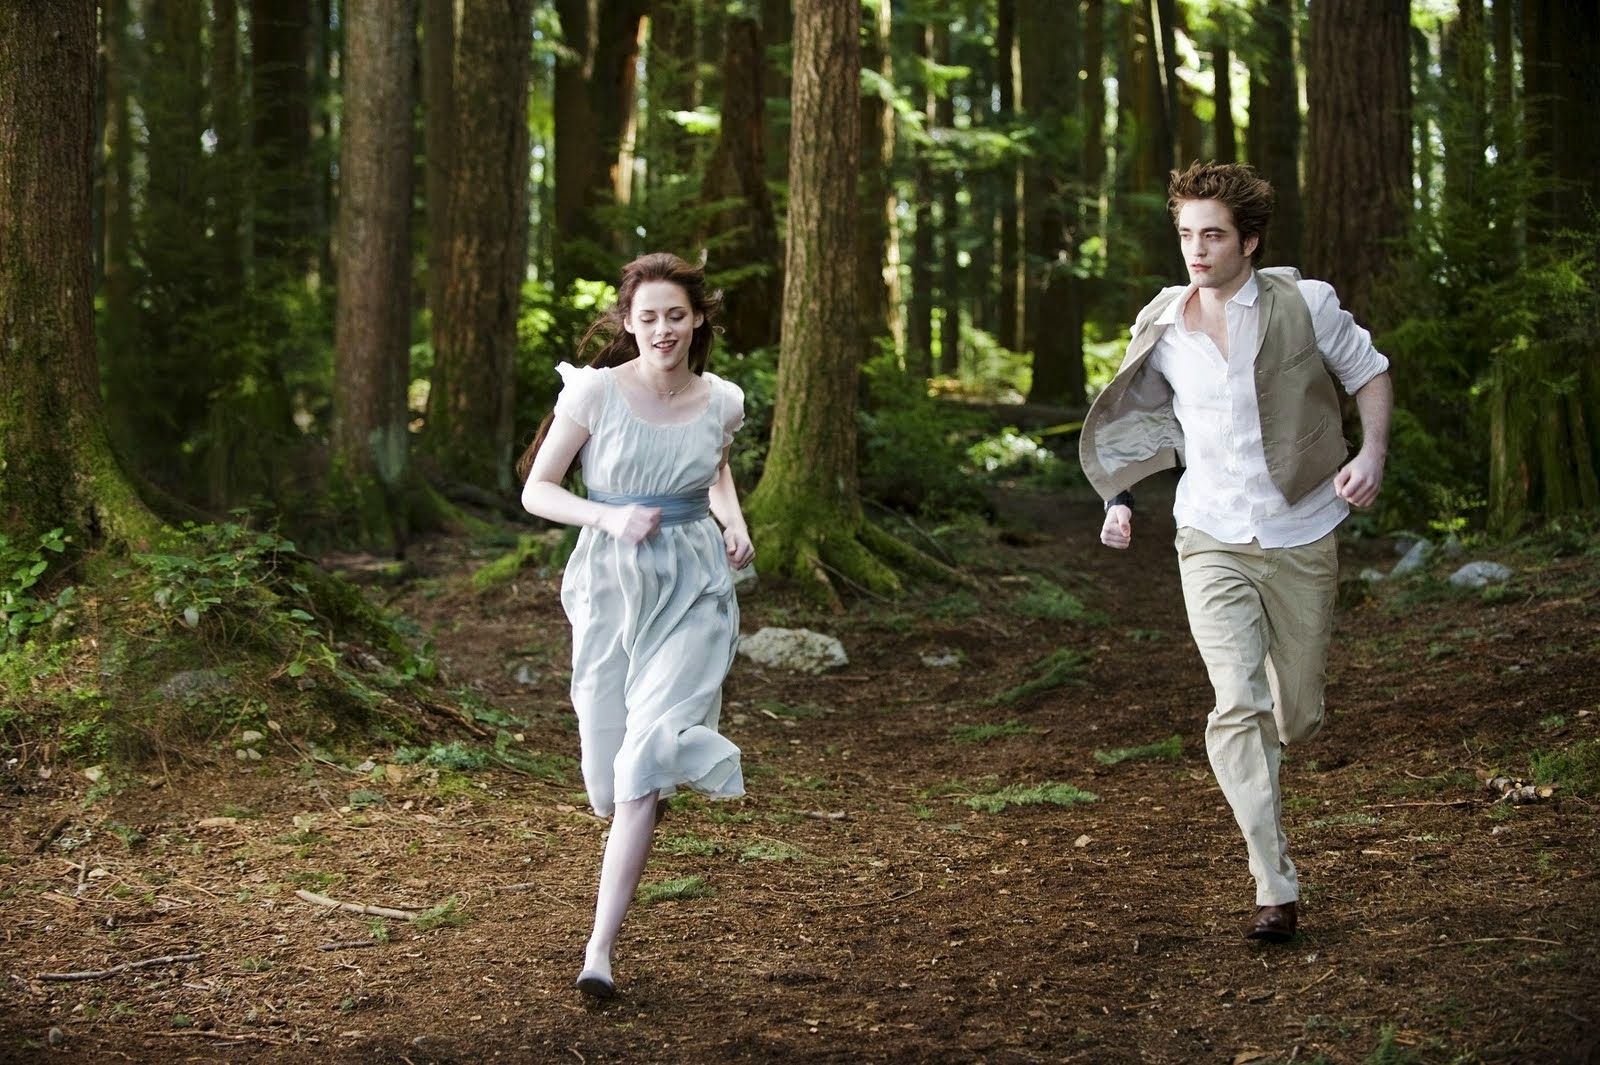 Global Pictures Gallery: Twilight Movie Full HD Wallpapers